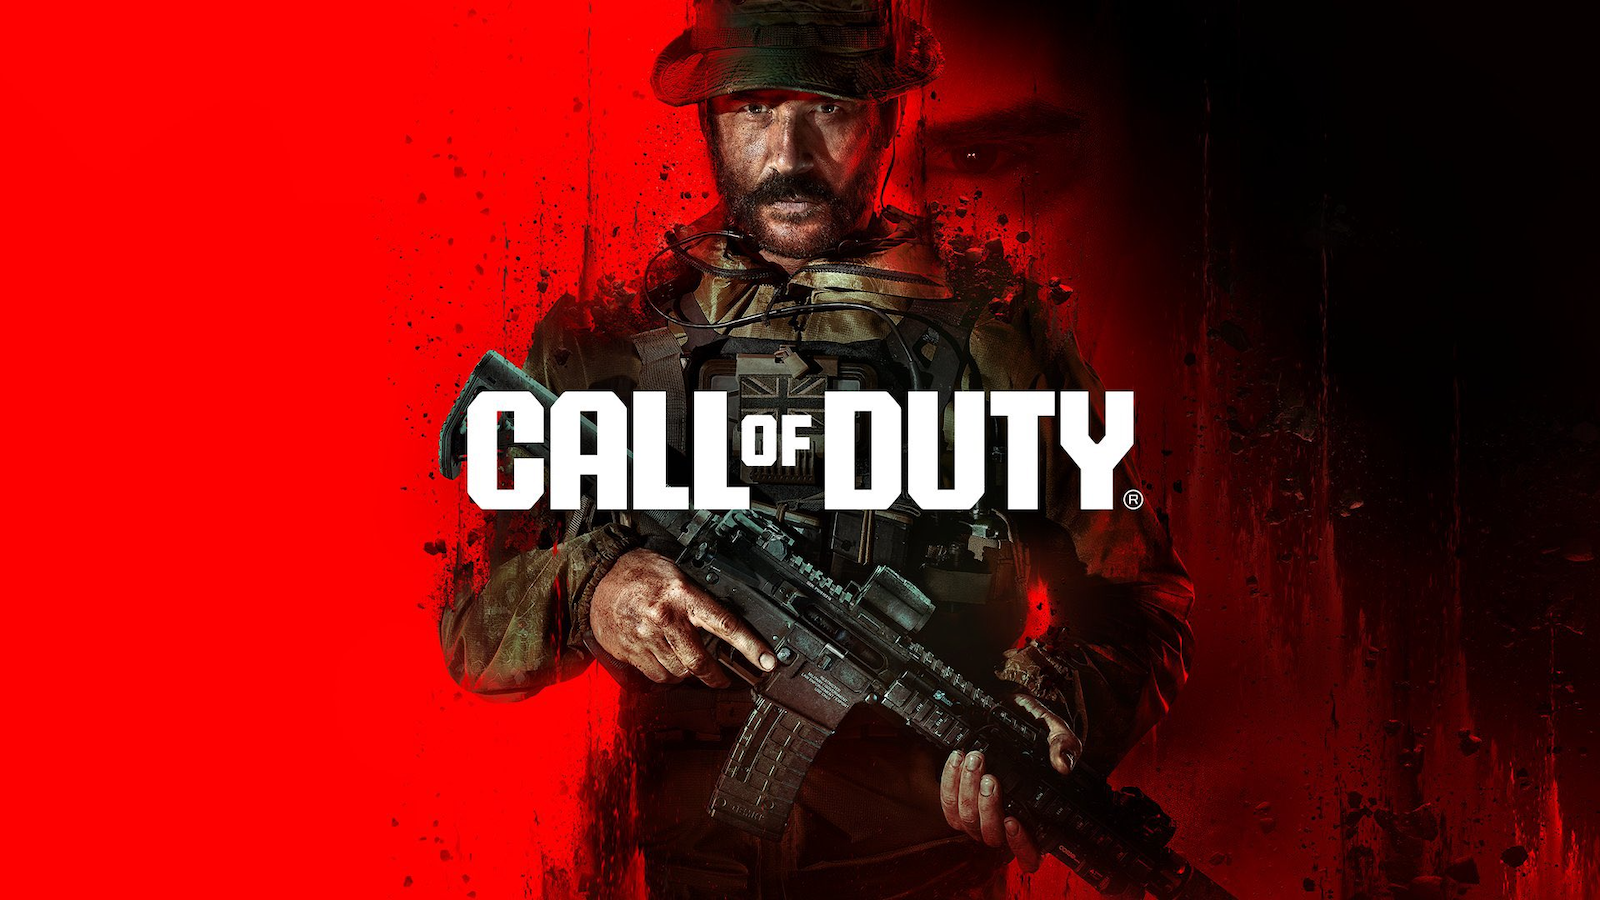 Announcement: Call of Duty: Modern Warfare III Campaign Details, COD Next,  and Multiplayer Beta Dates